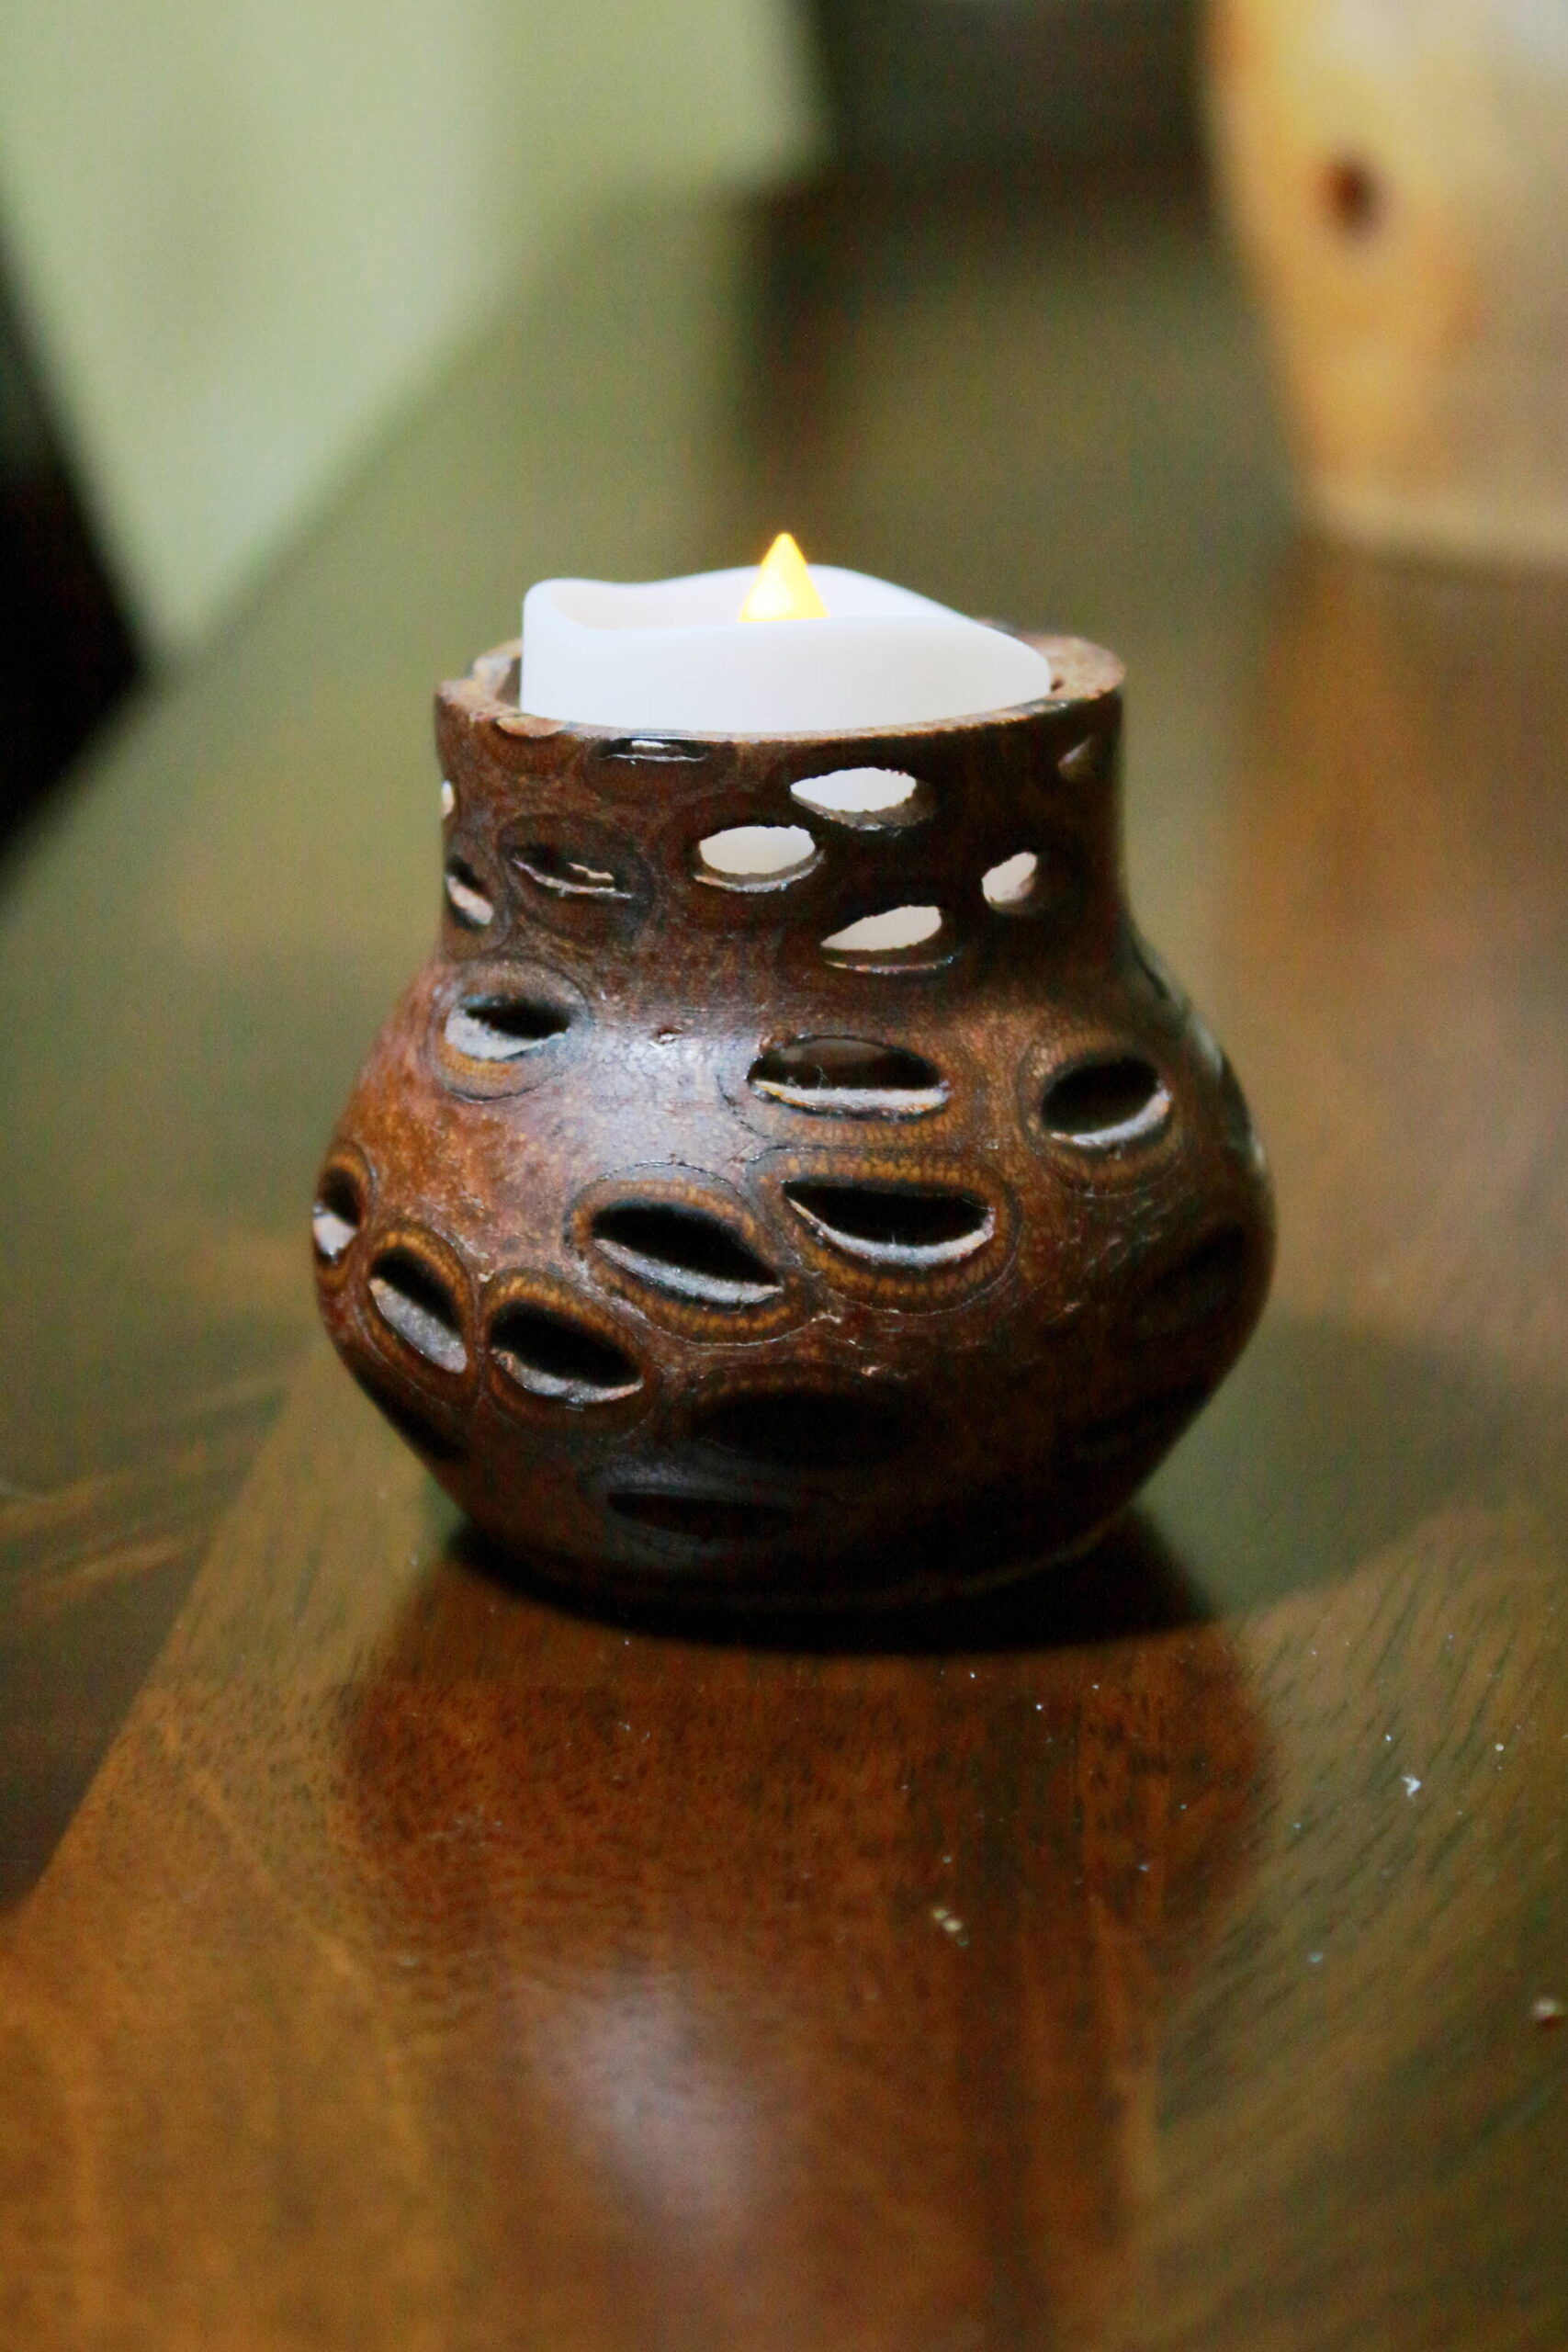 This candle holder is crafter from a single banksia seed pod from Australia, giving it the unique holes in its design. Photo by Keelin Everly-Lang / The Mirror